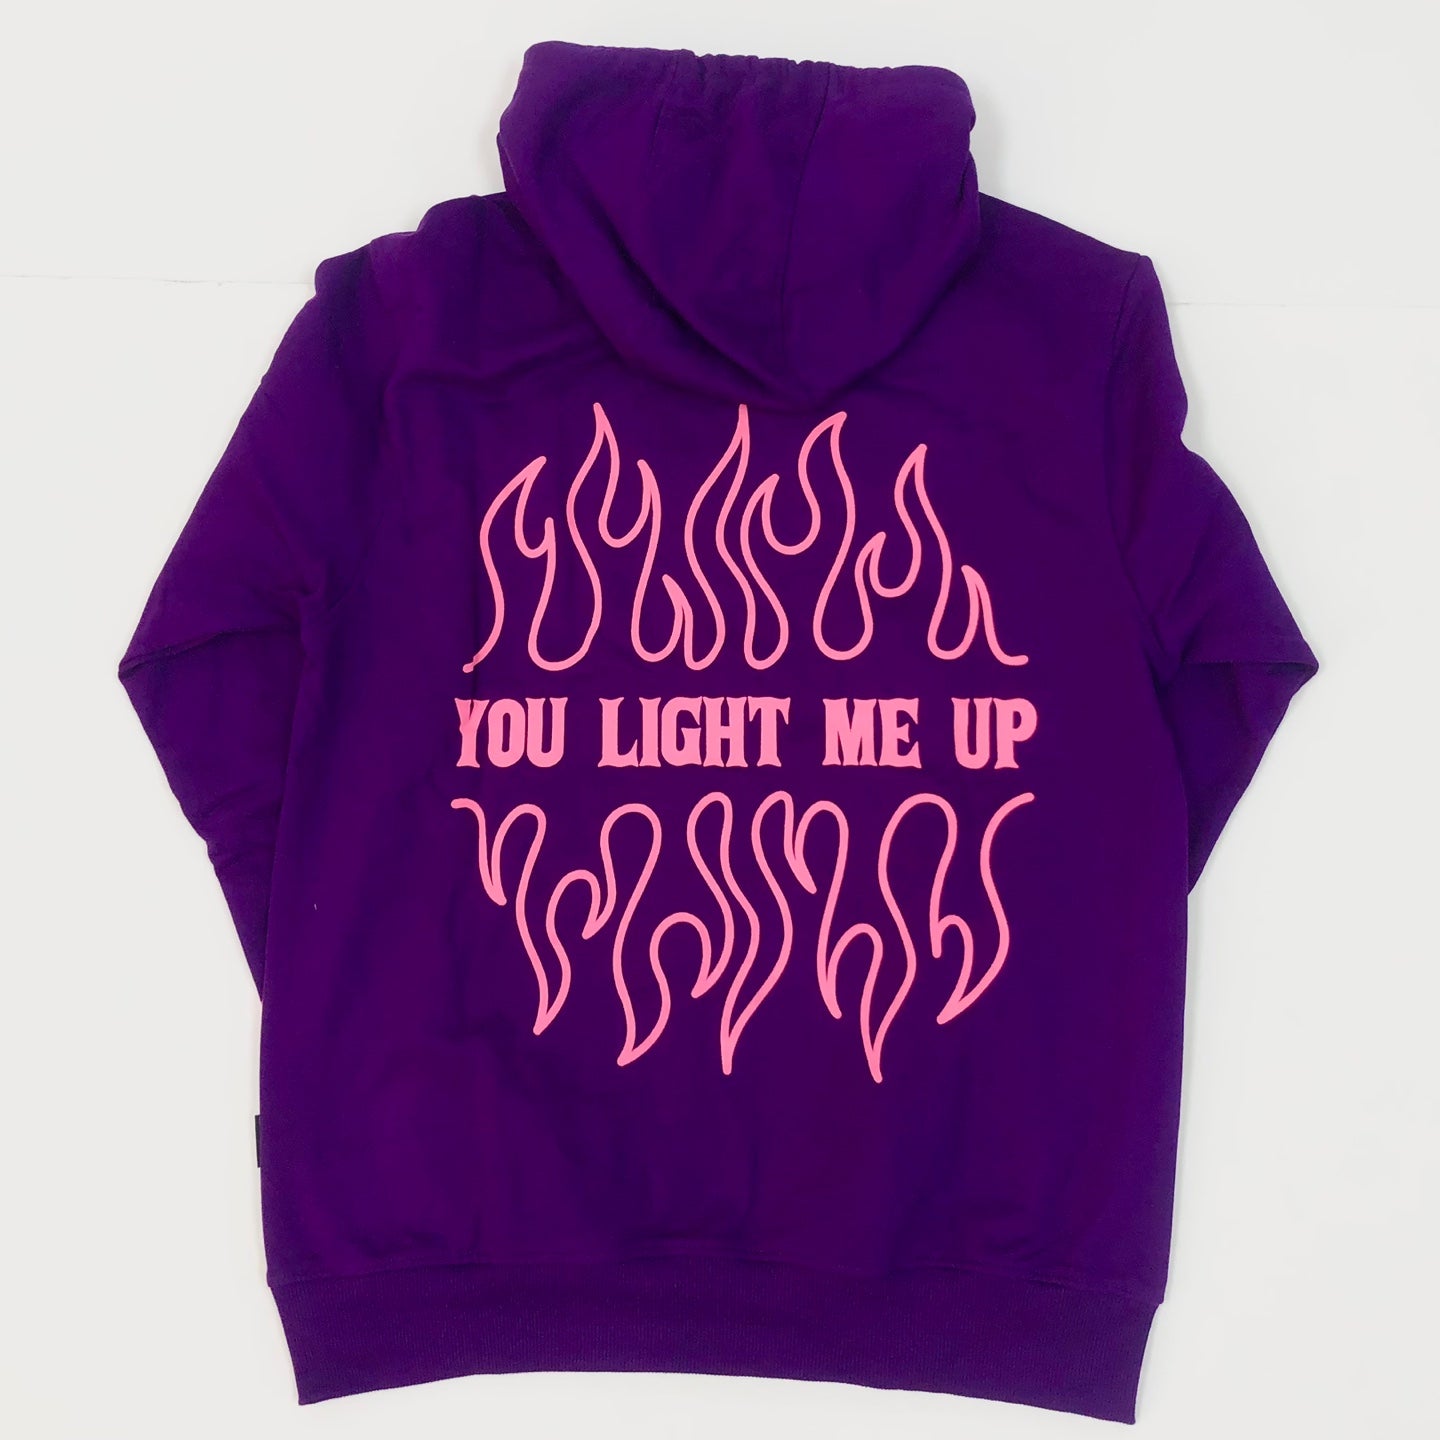 REBEL MINDS You Light Me Up Graphic Hoodie